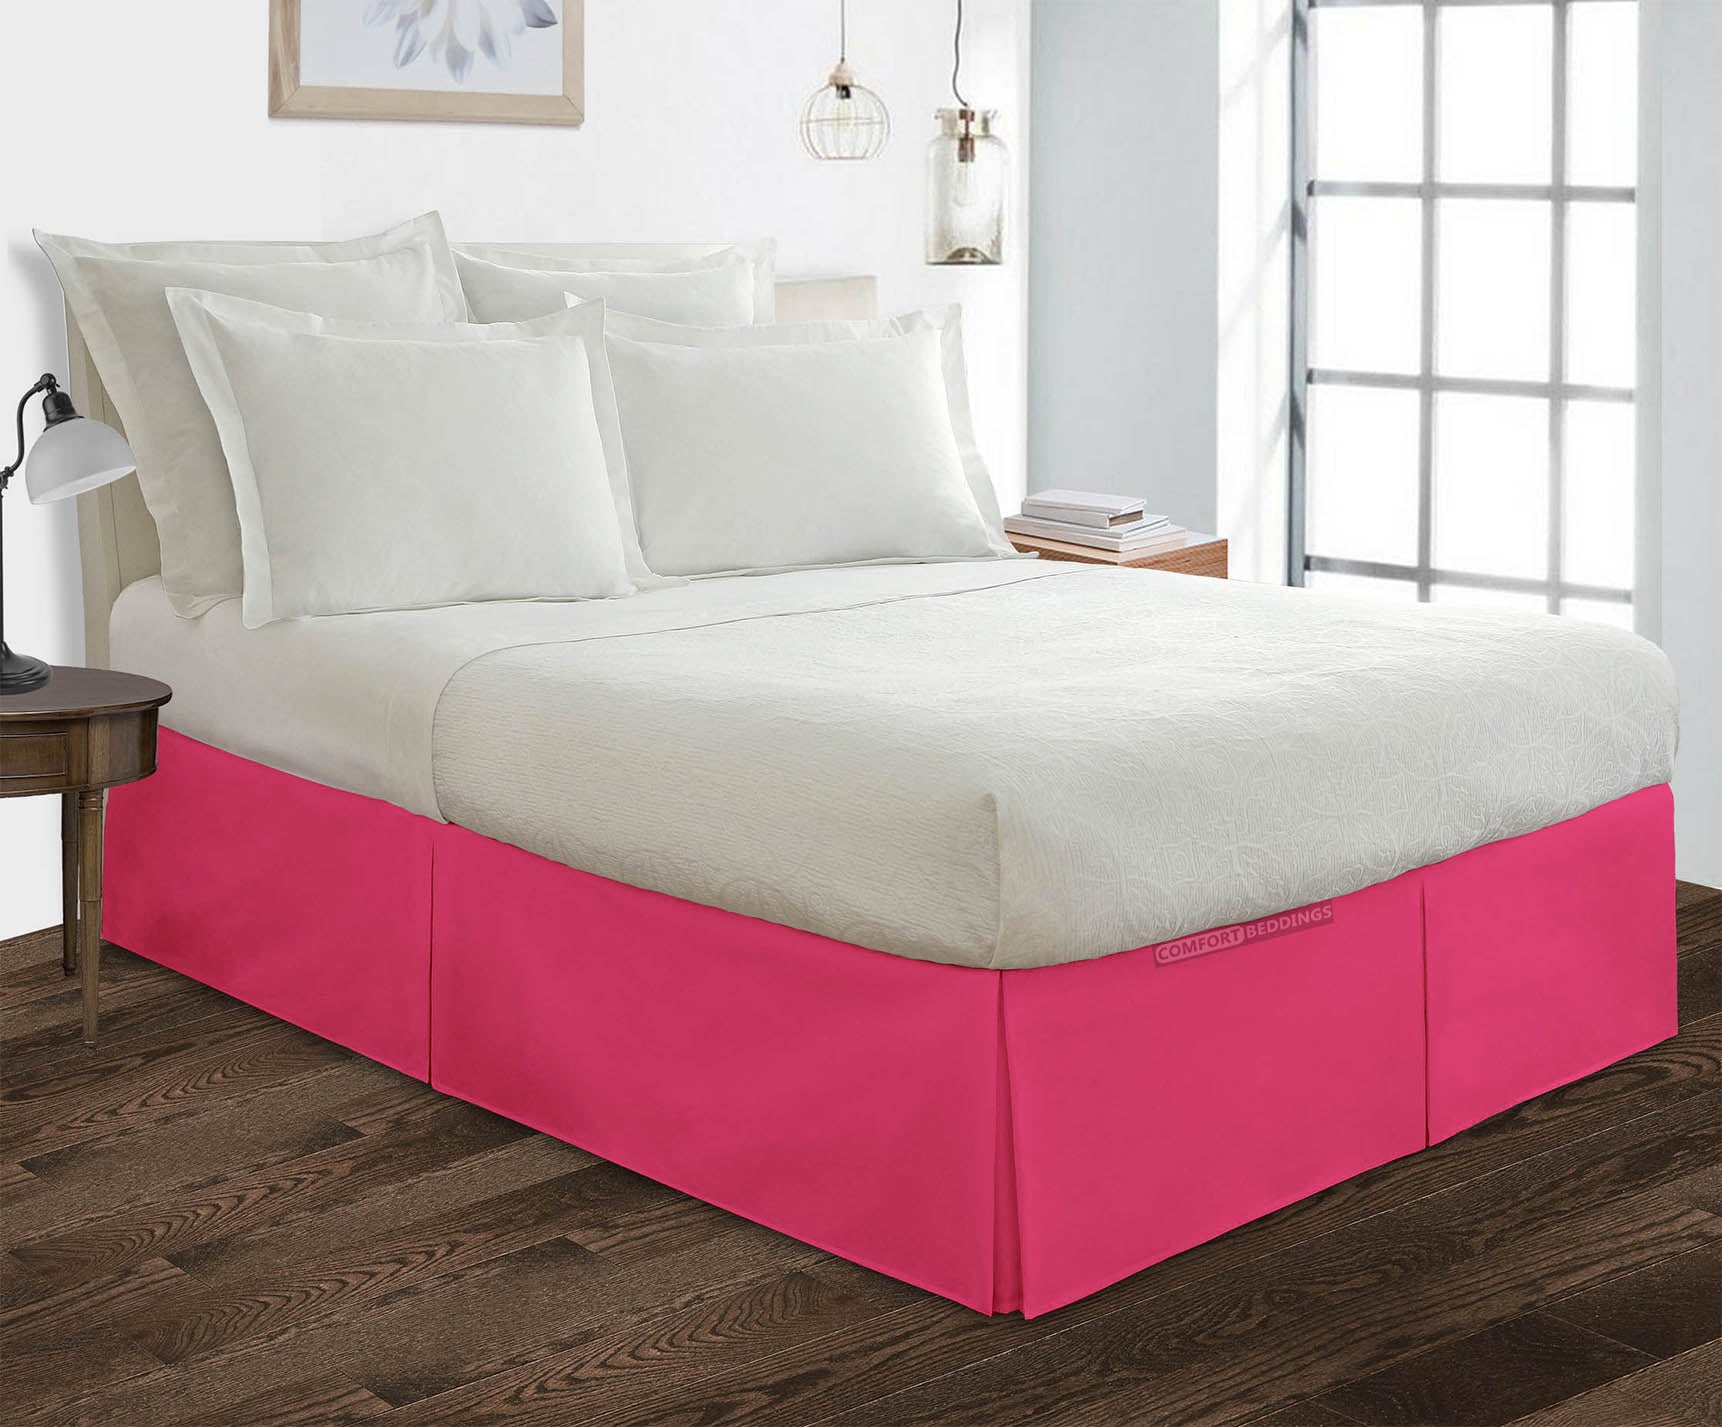 Hot Pink Pleated Bed Skirt